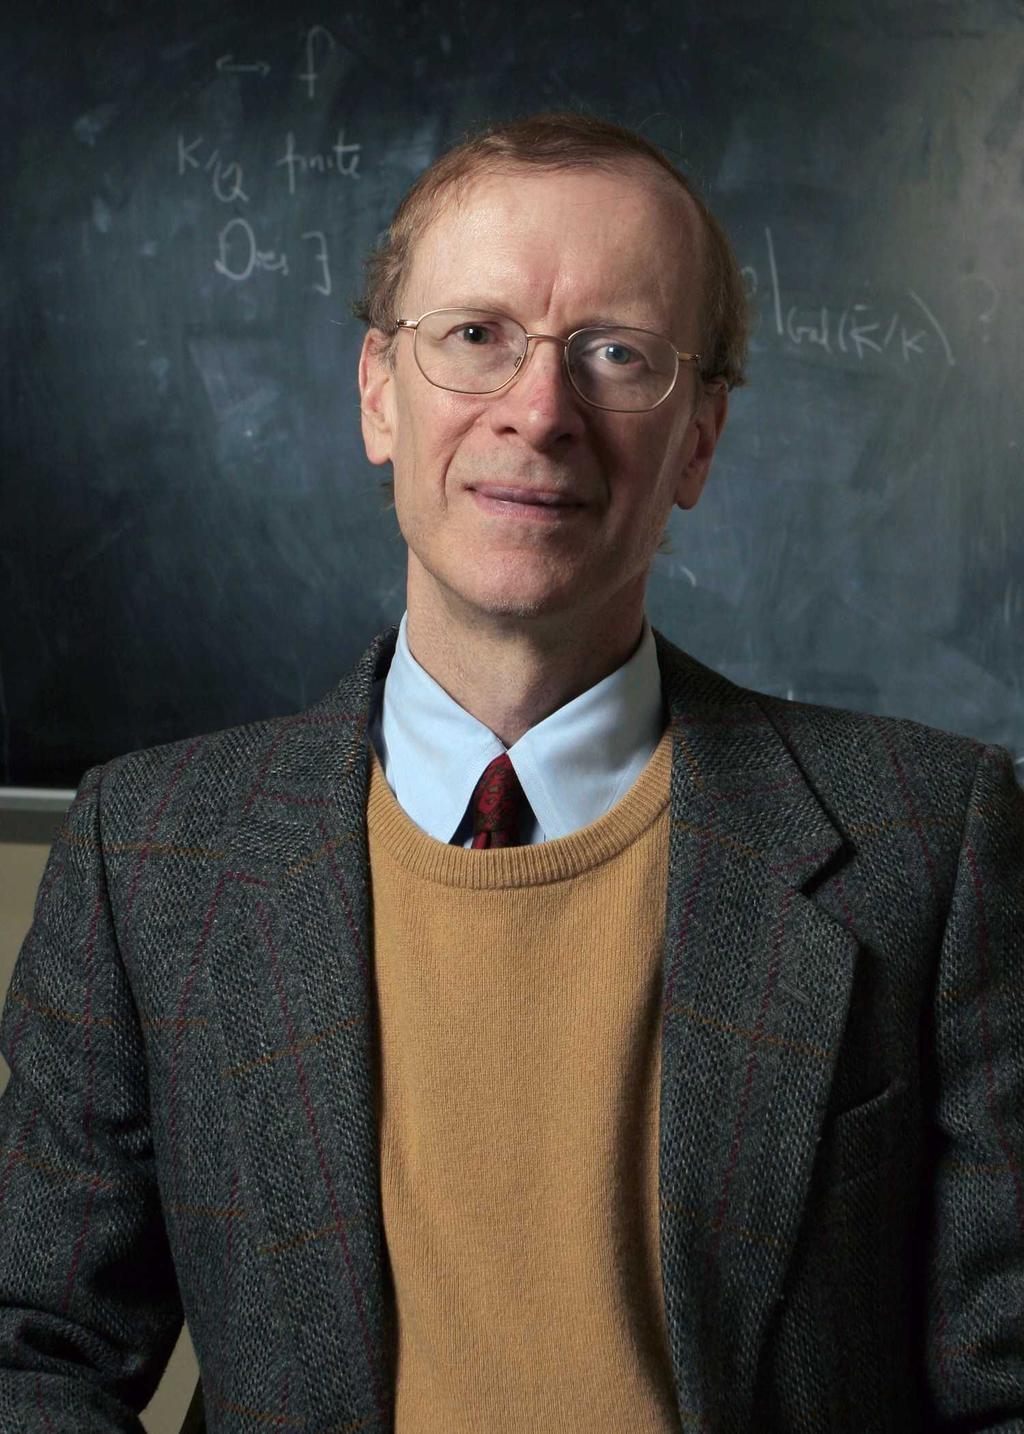 Andrew John Wiles In 1995, Andrew John Wiles (April 11, 1953 - ) succeeded in proving the 350 year-old Fermat s Last Theorem (FLT), and suddenly the unassuming English mathematician became a